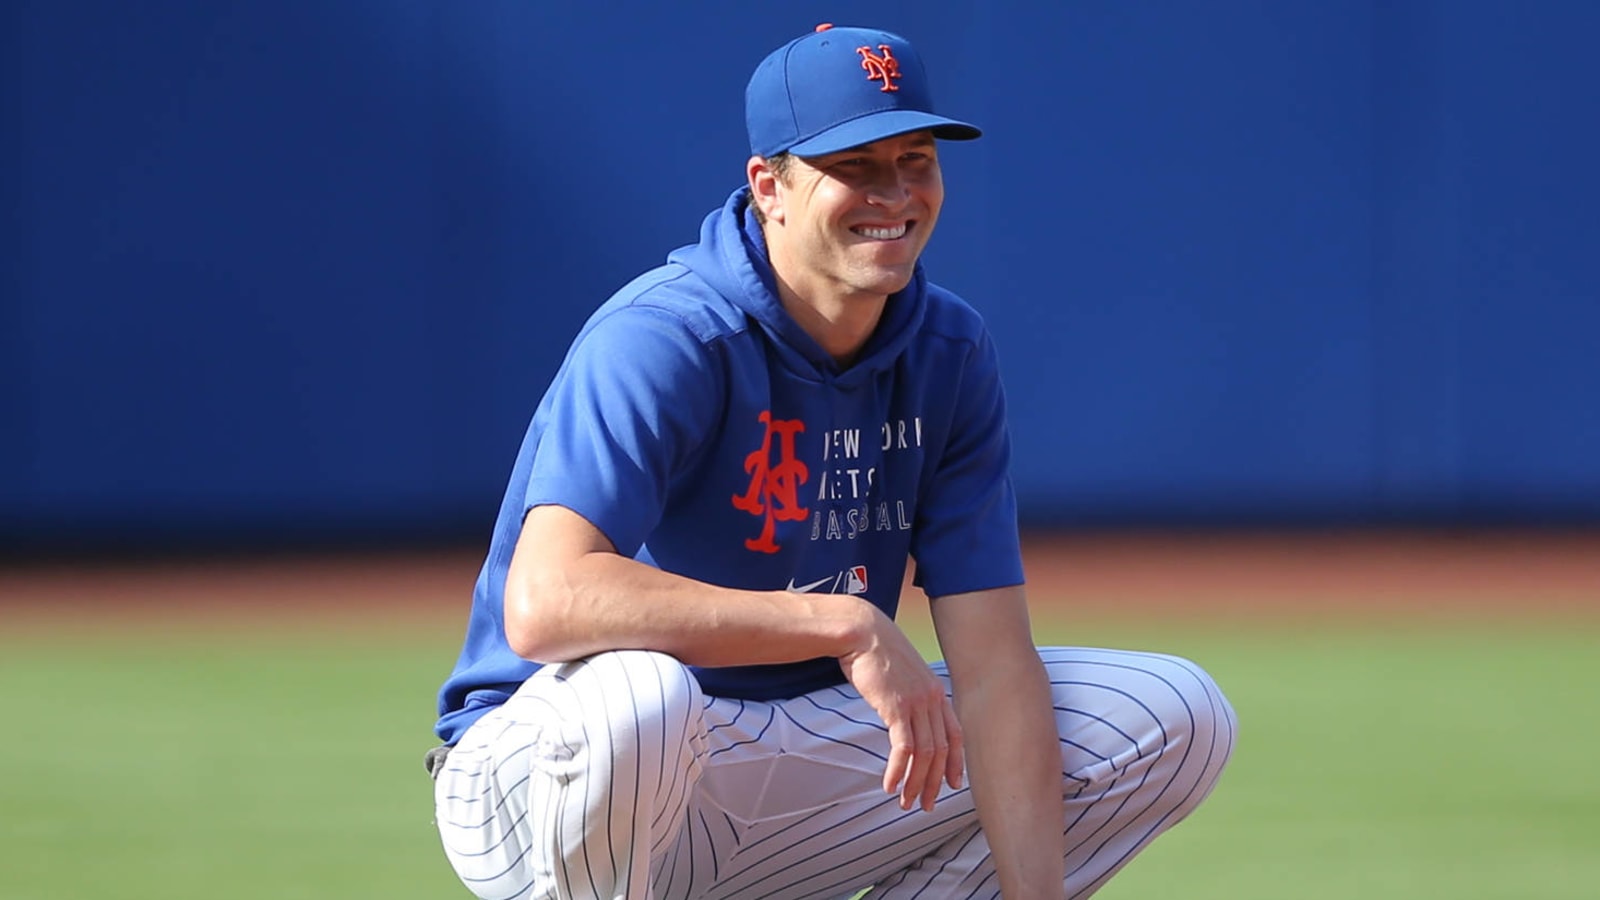 Jacob deGrom shows appreciation for young fan's support